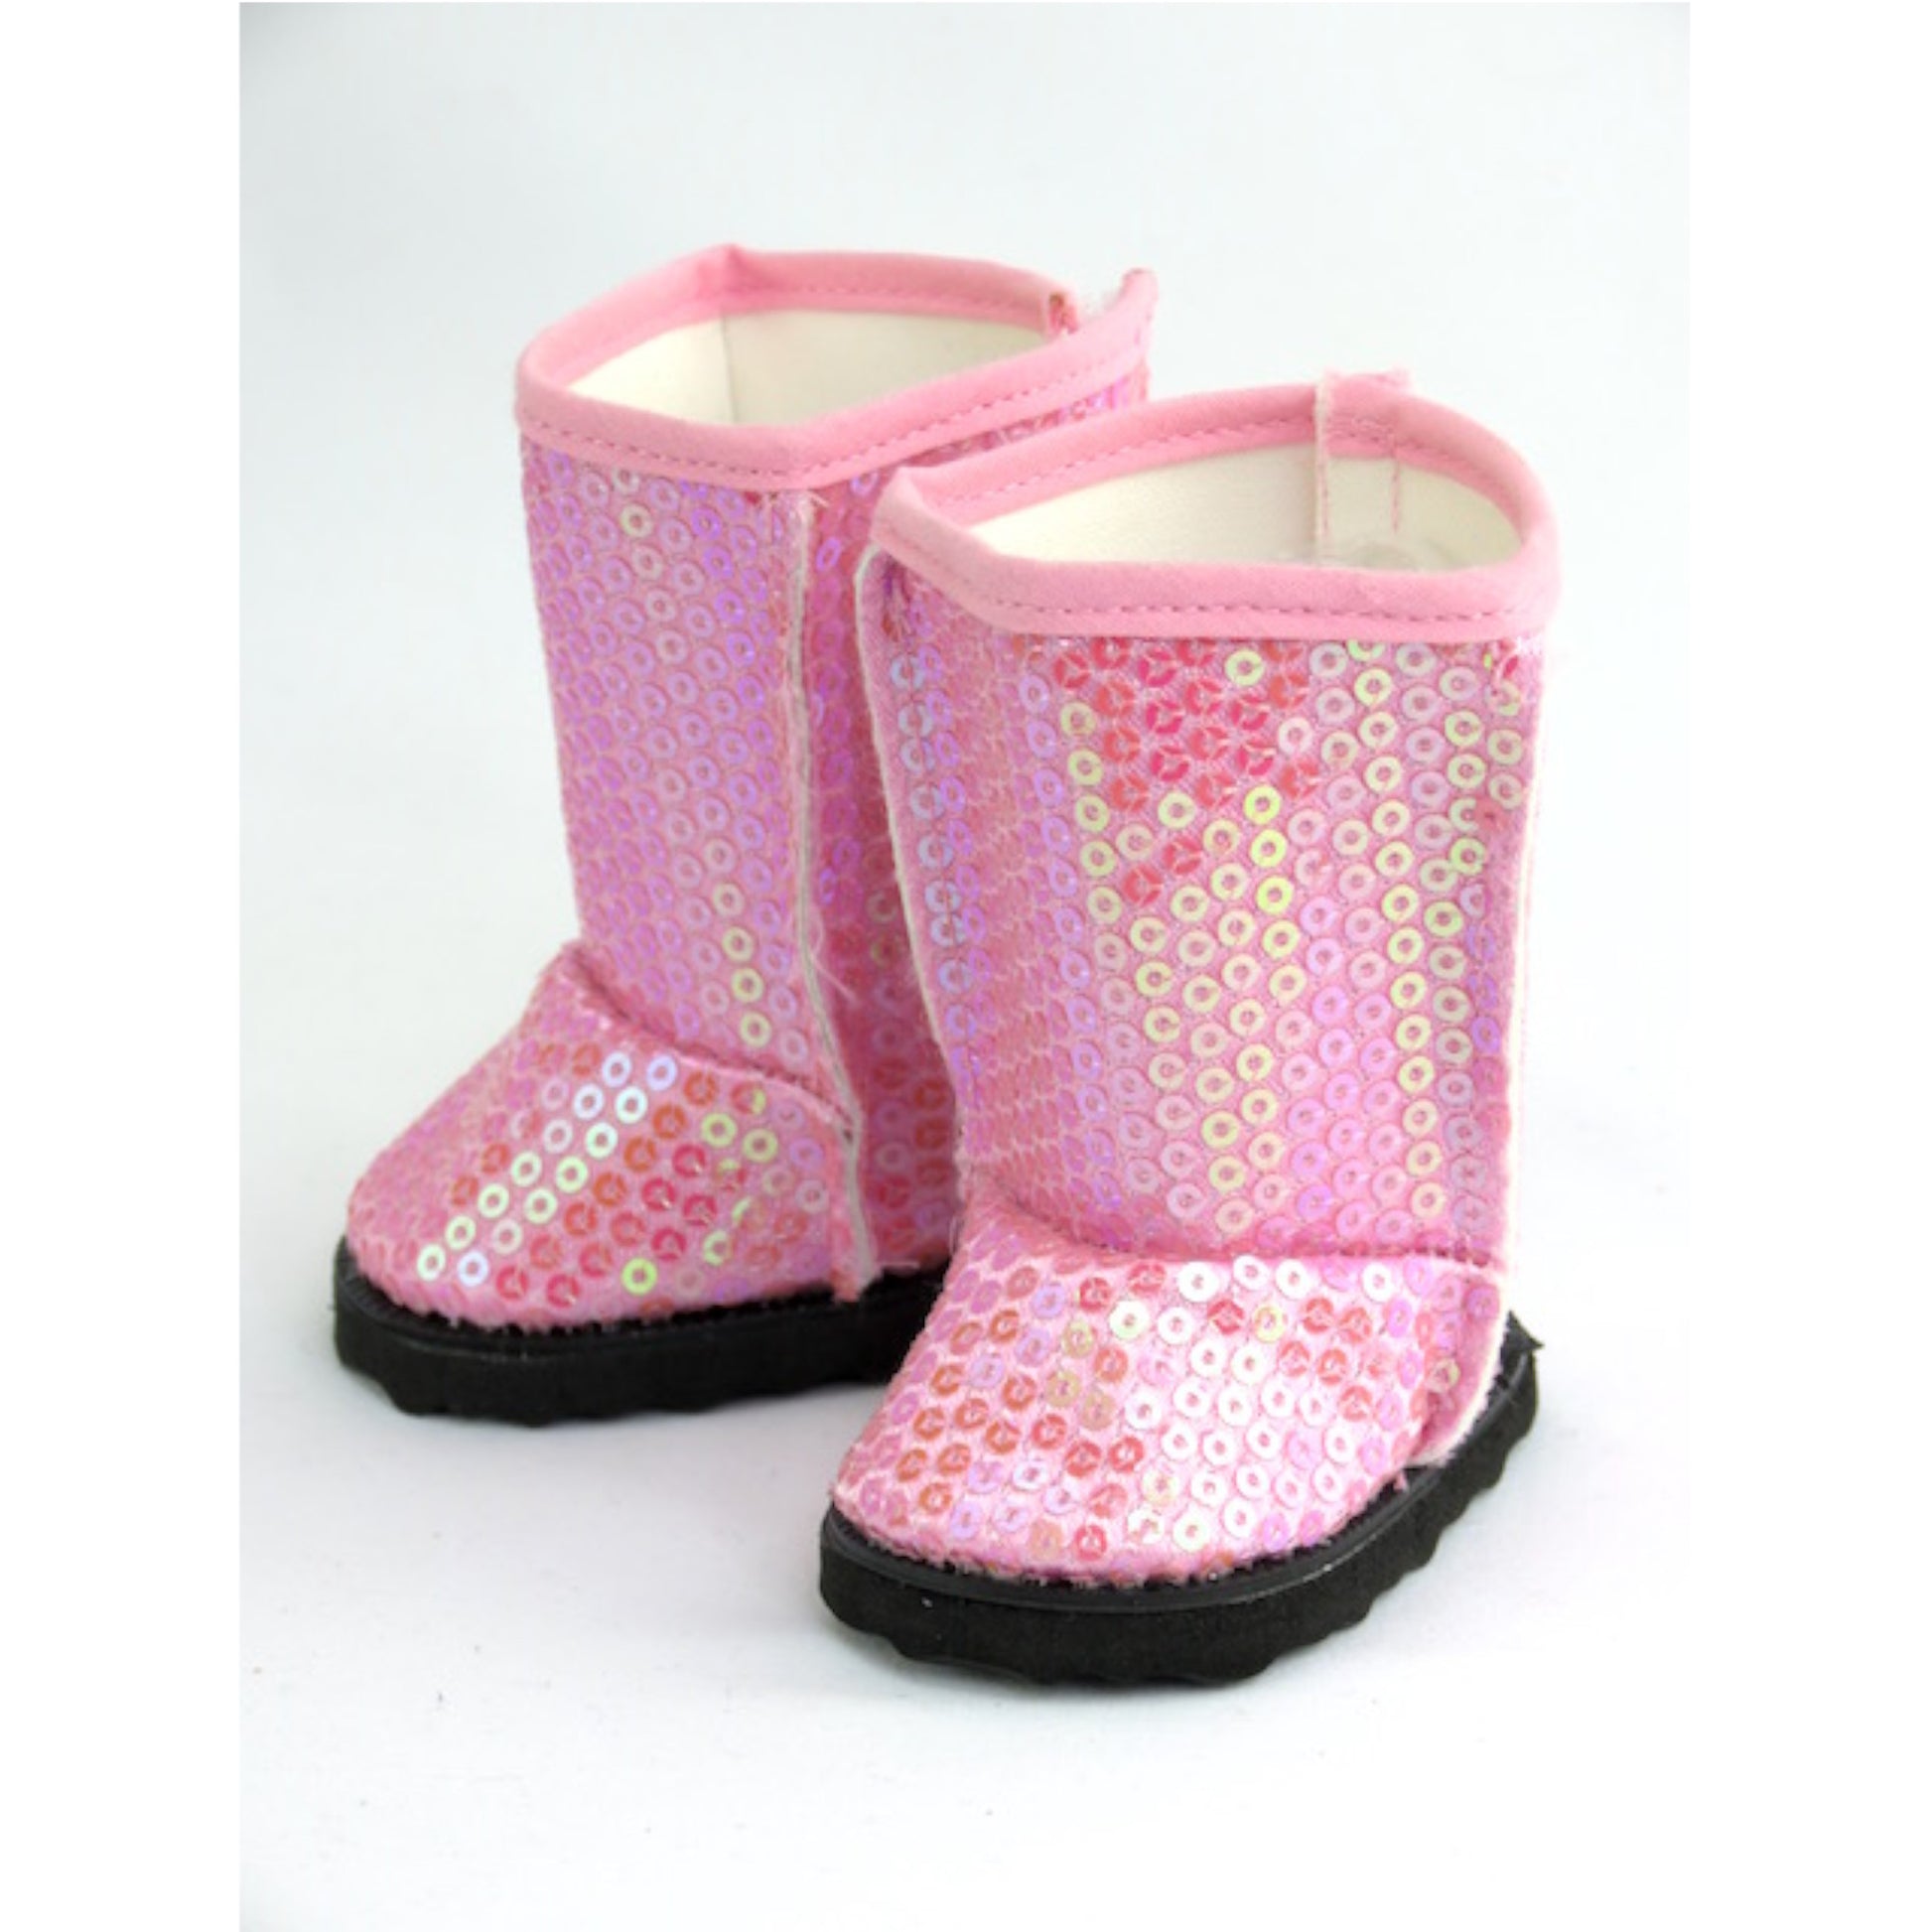 Pink Sequin Boots for 18-inch dolls